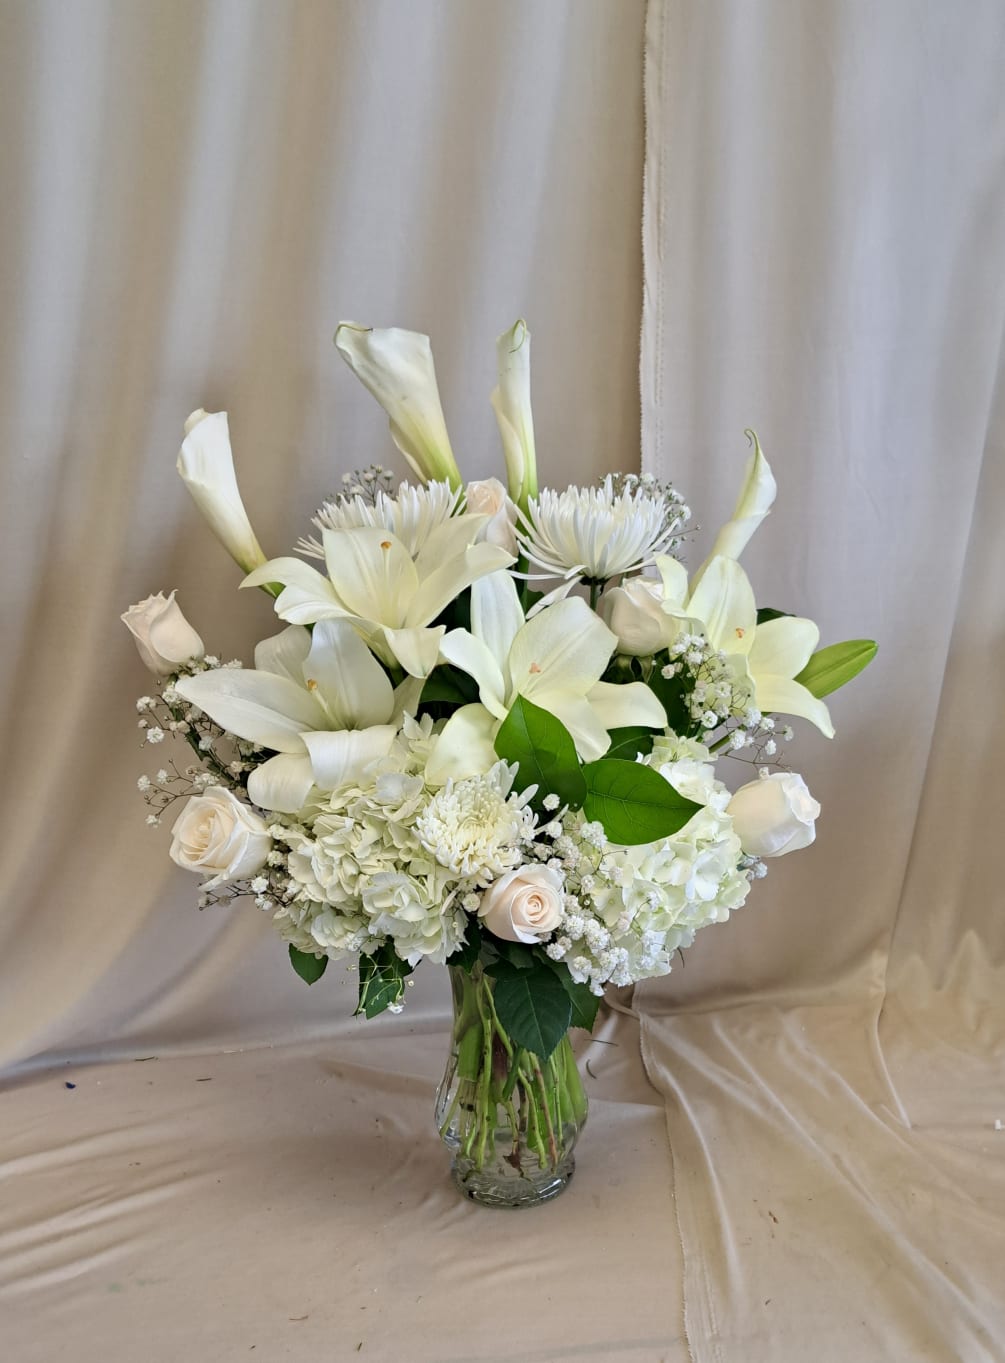 Calla Lilies
Lilies
Hydrangeas 
Roses
Spider
Baby&rsquo;s breath